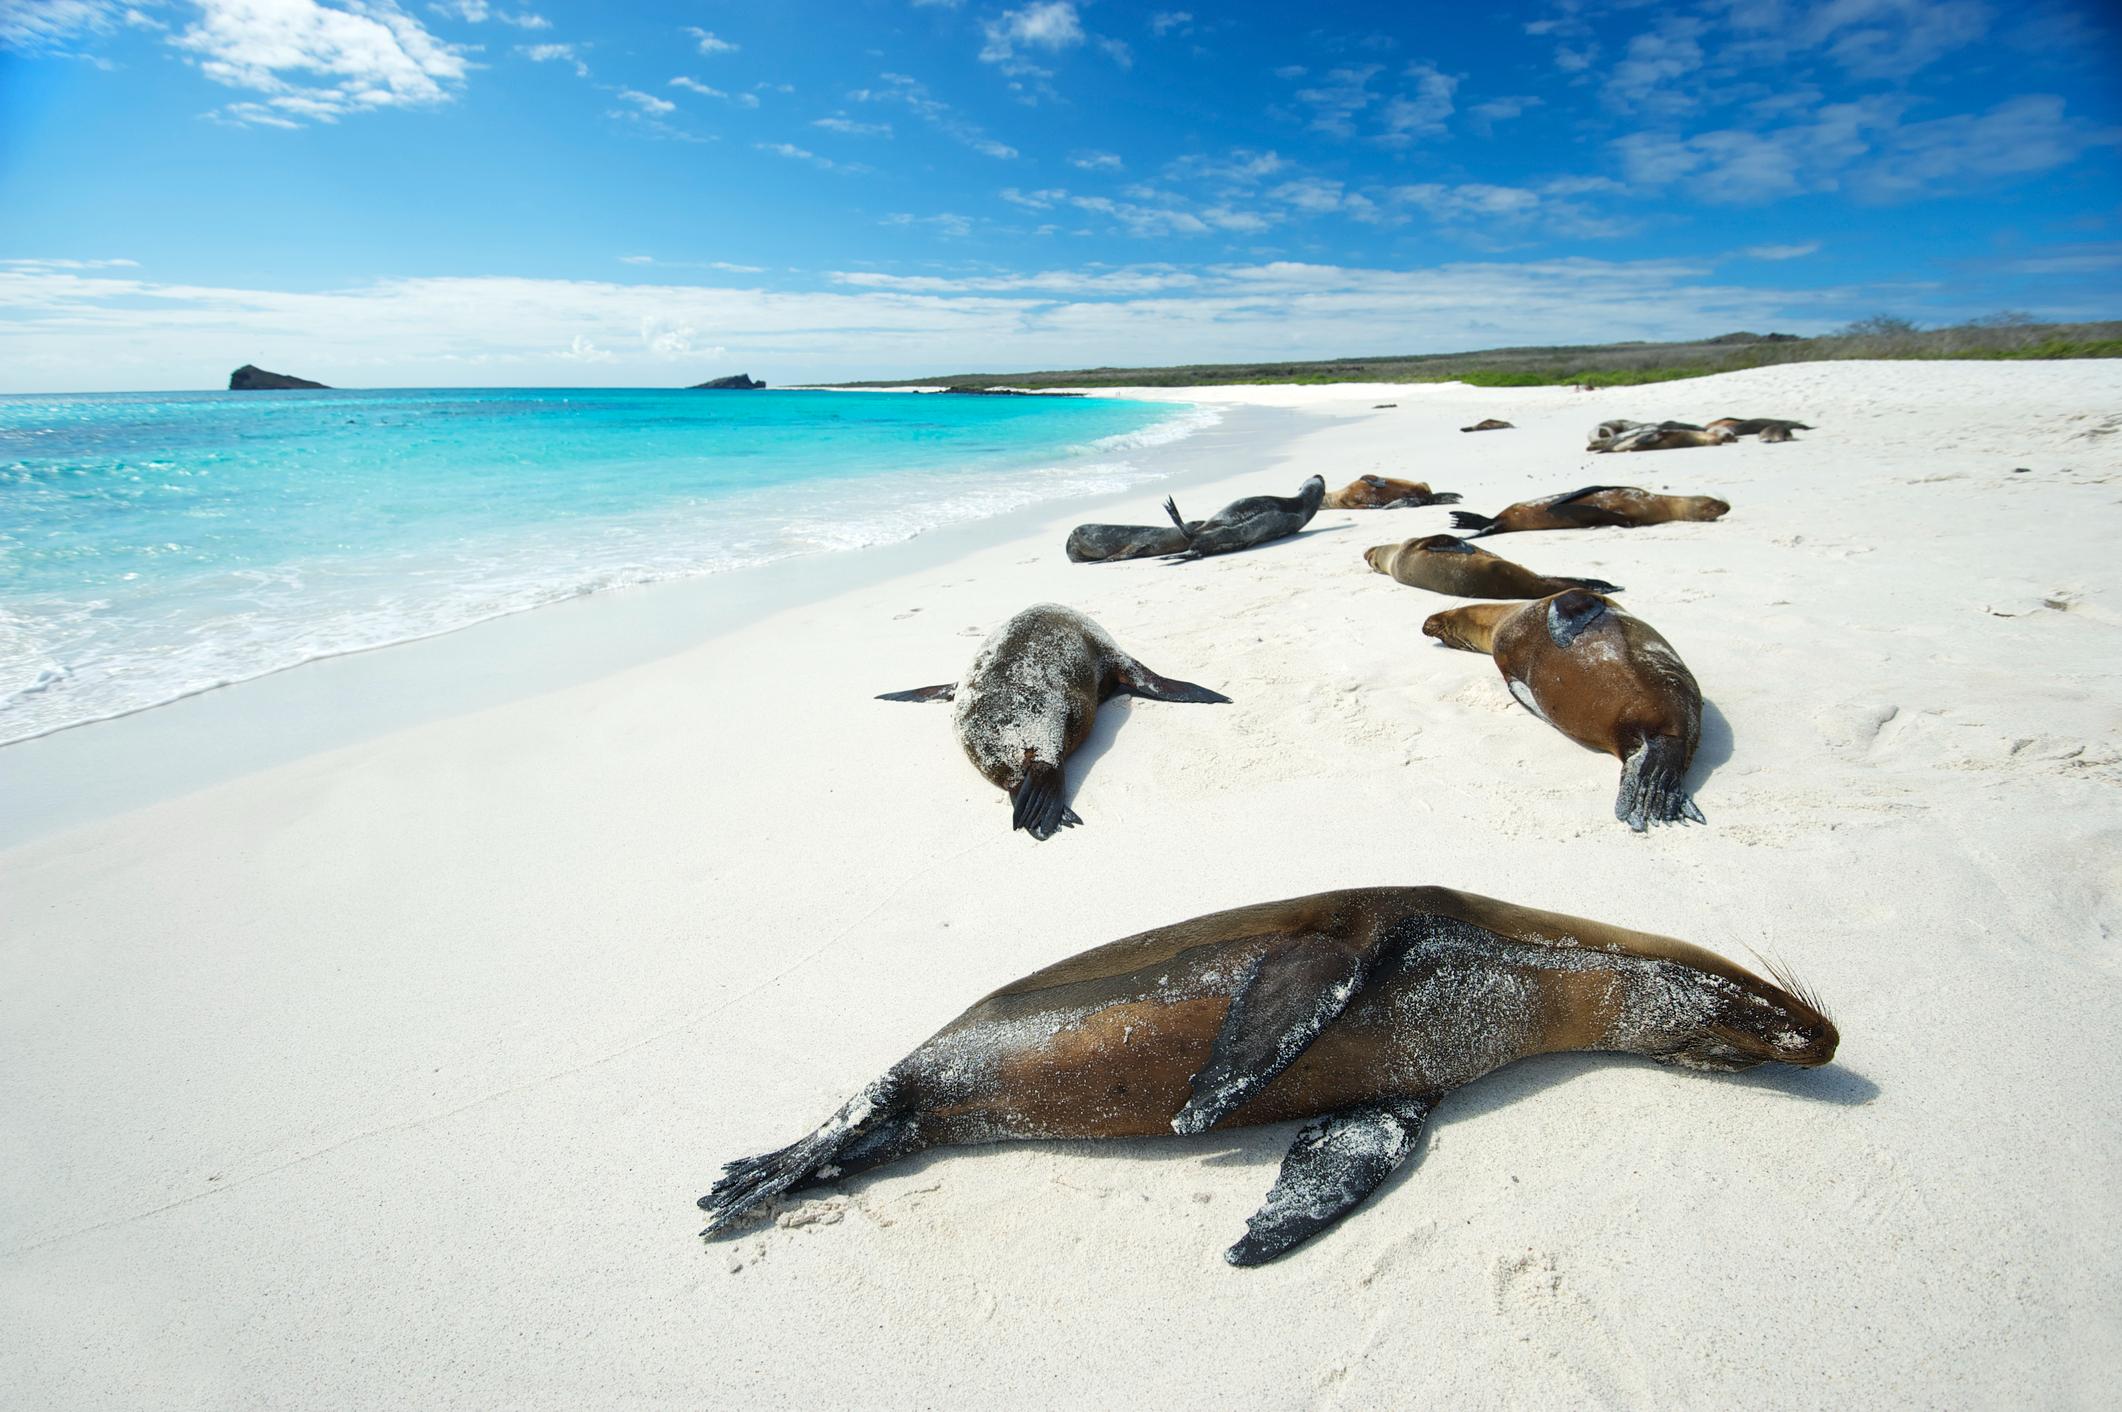 Sea lions sunning themselves at Gardner Bay, Espanola Island, the Galapagos Islands. Photo: Getty.